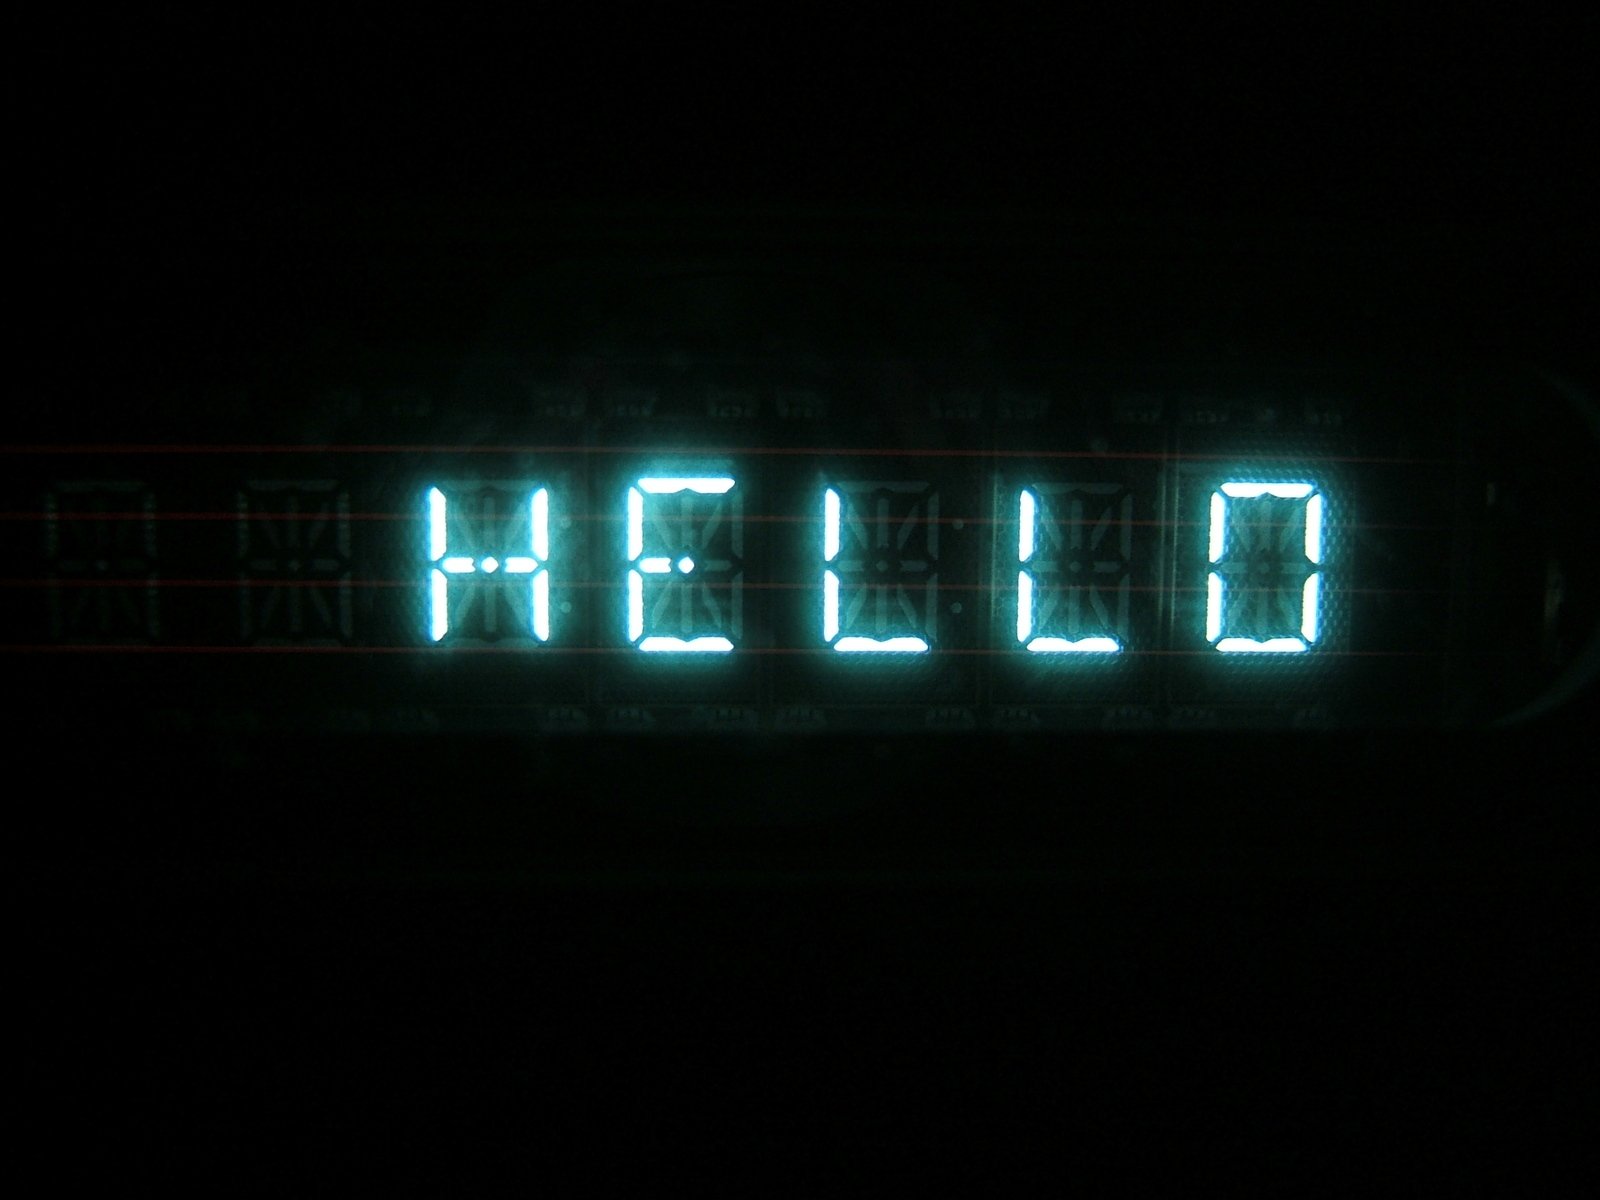 there is a time displayed on a clock that says hello